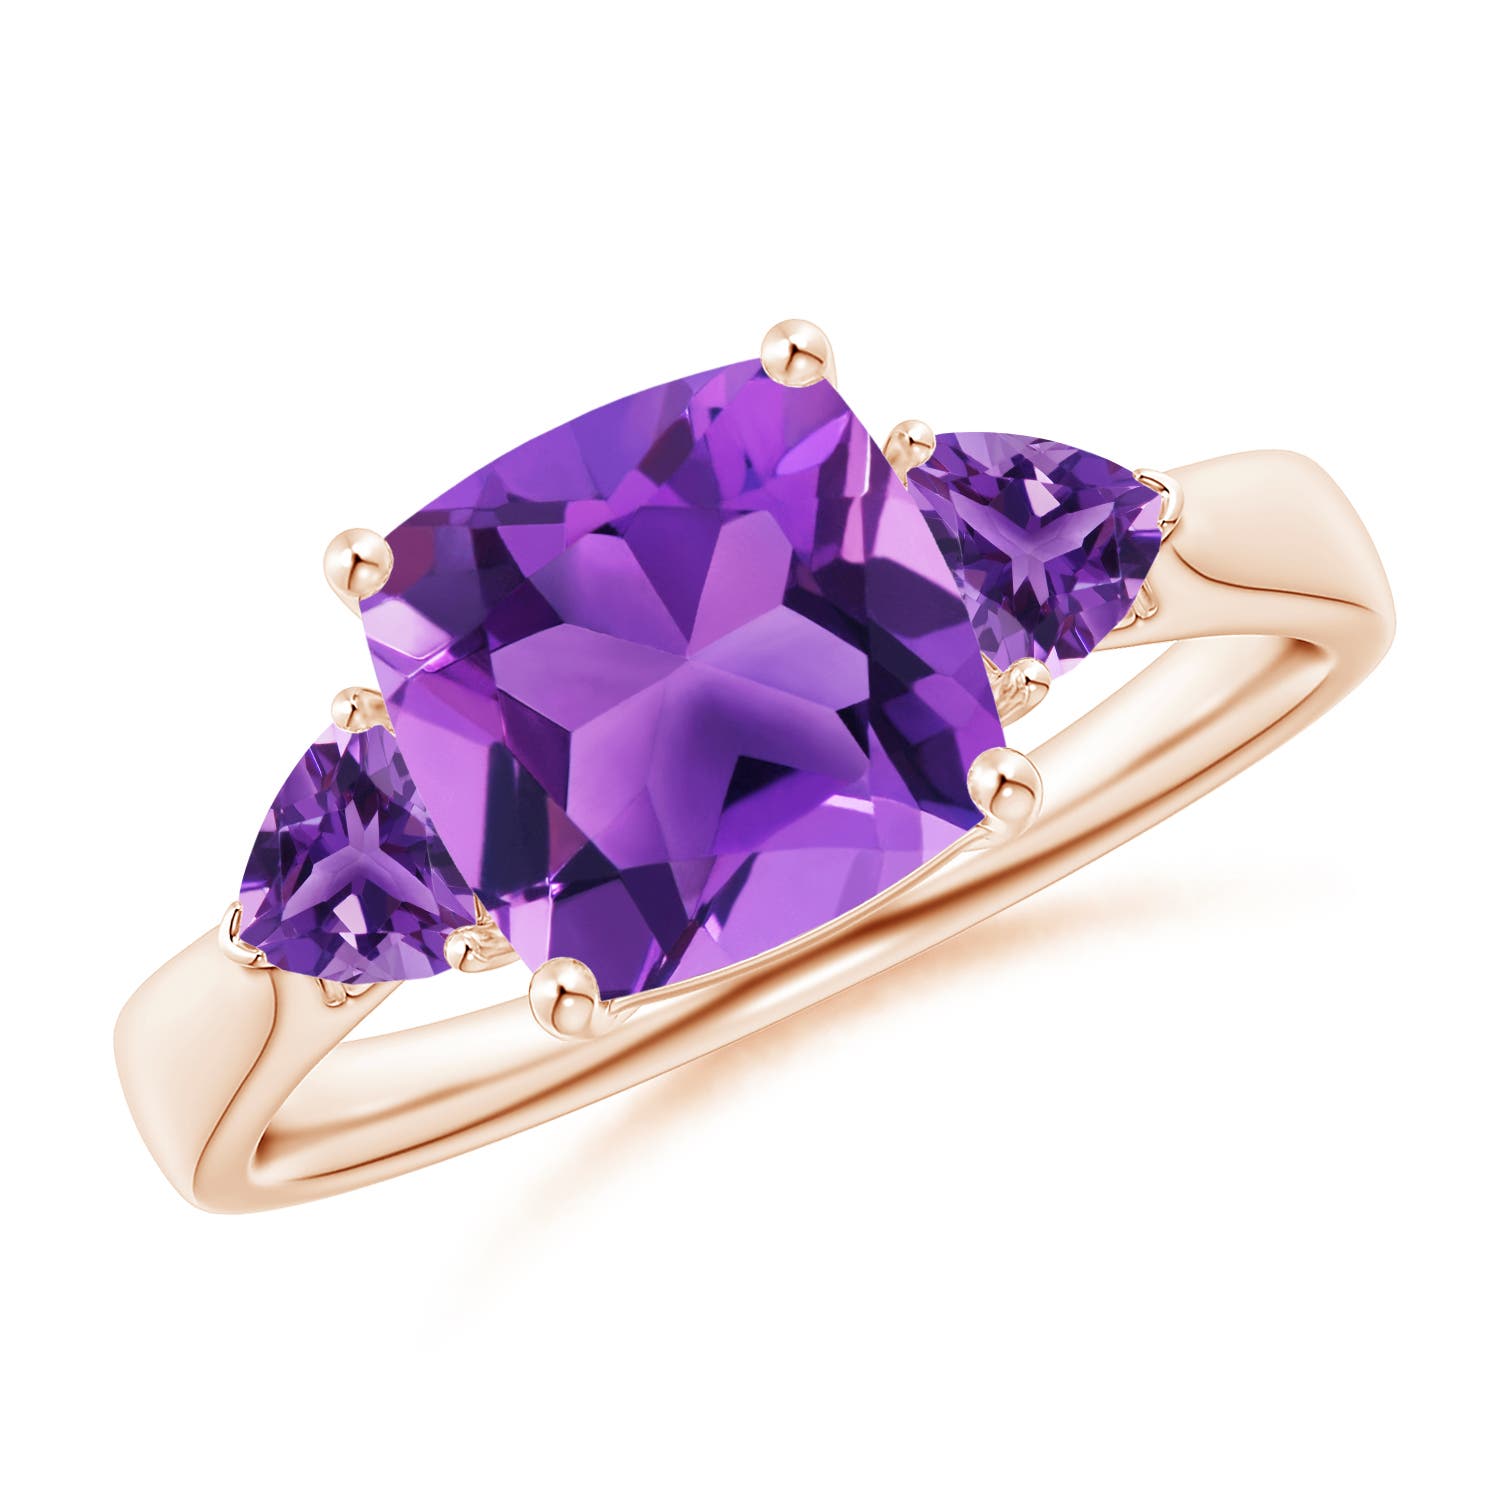 AAA - Amethyst / 2.6 CT / 14 KT Rose Gold